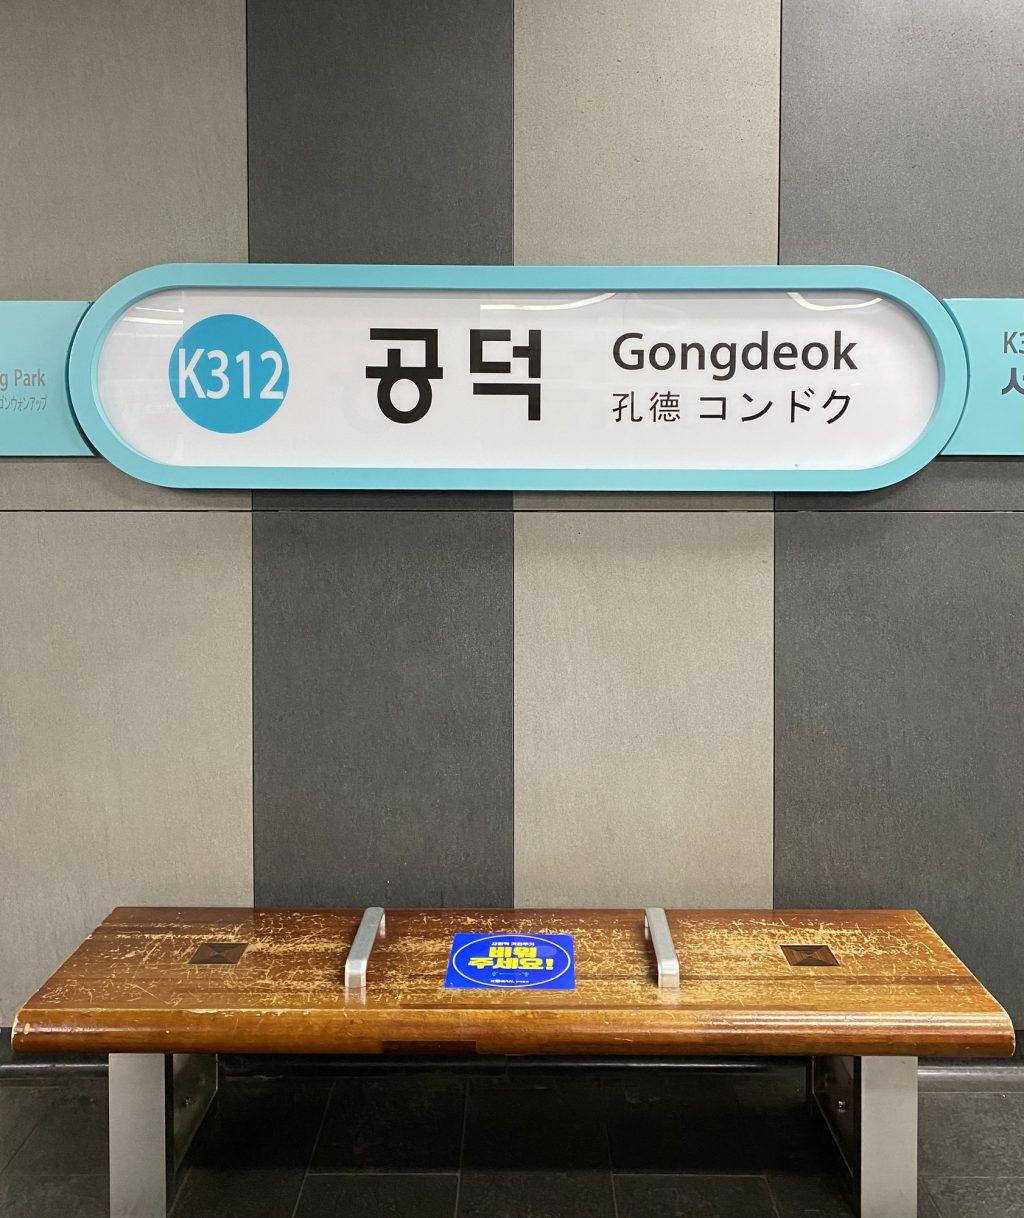 A sticker enforces the social distancing regulations for a bench inside the Gongdeok Station on Oct. 22. Every subway station I visited had similar reminders.